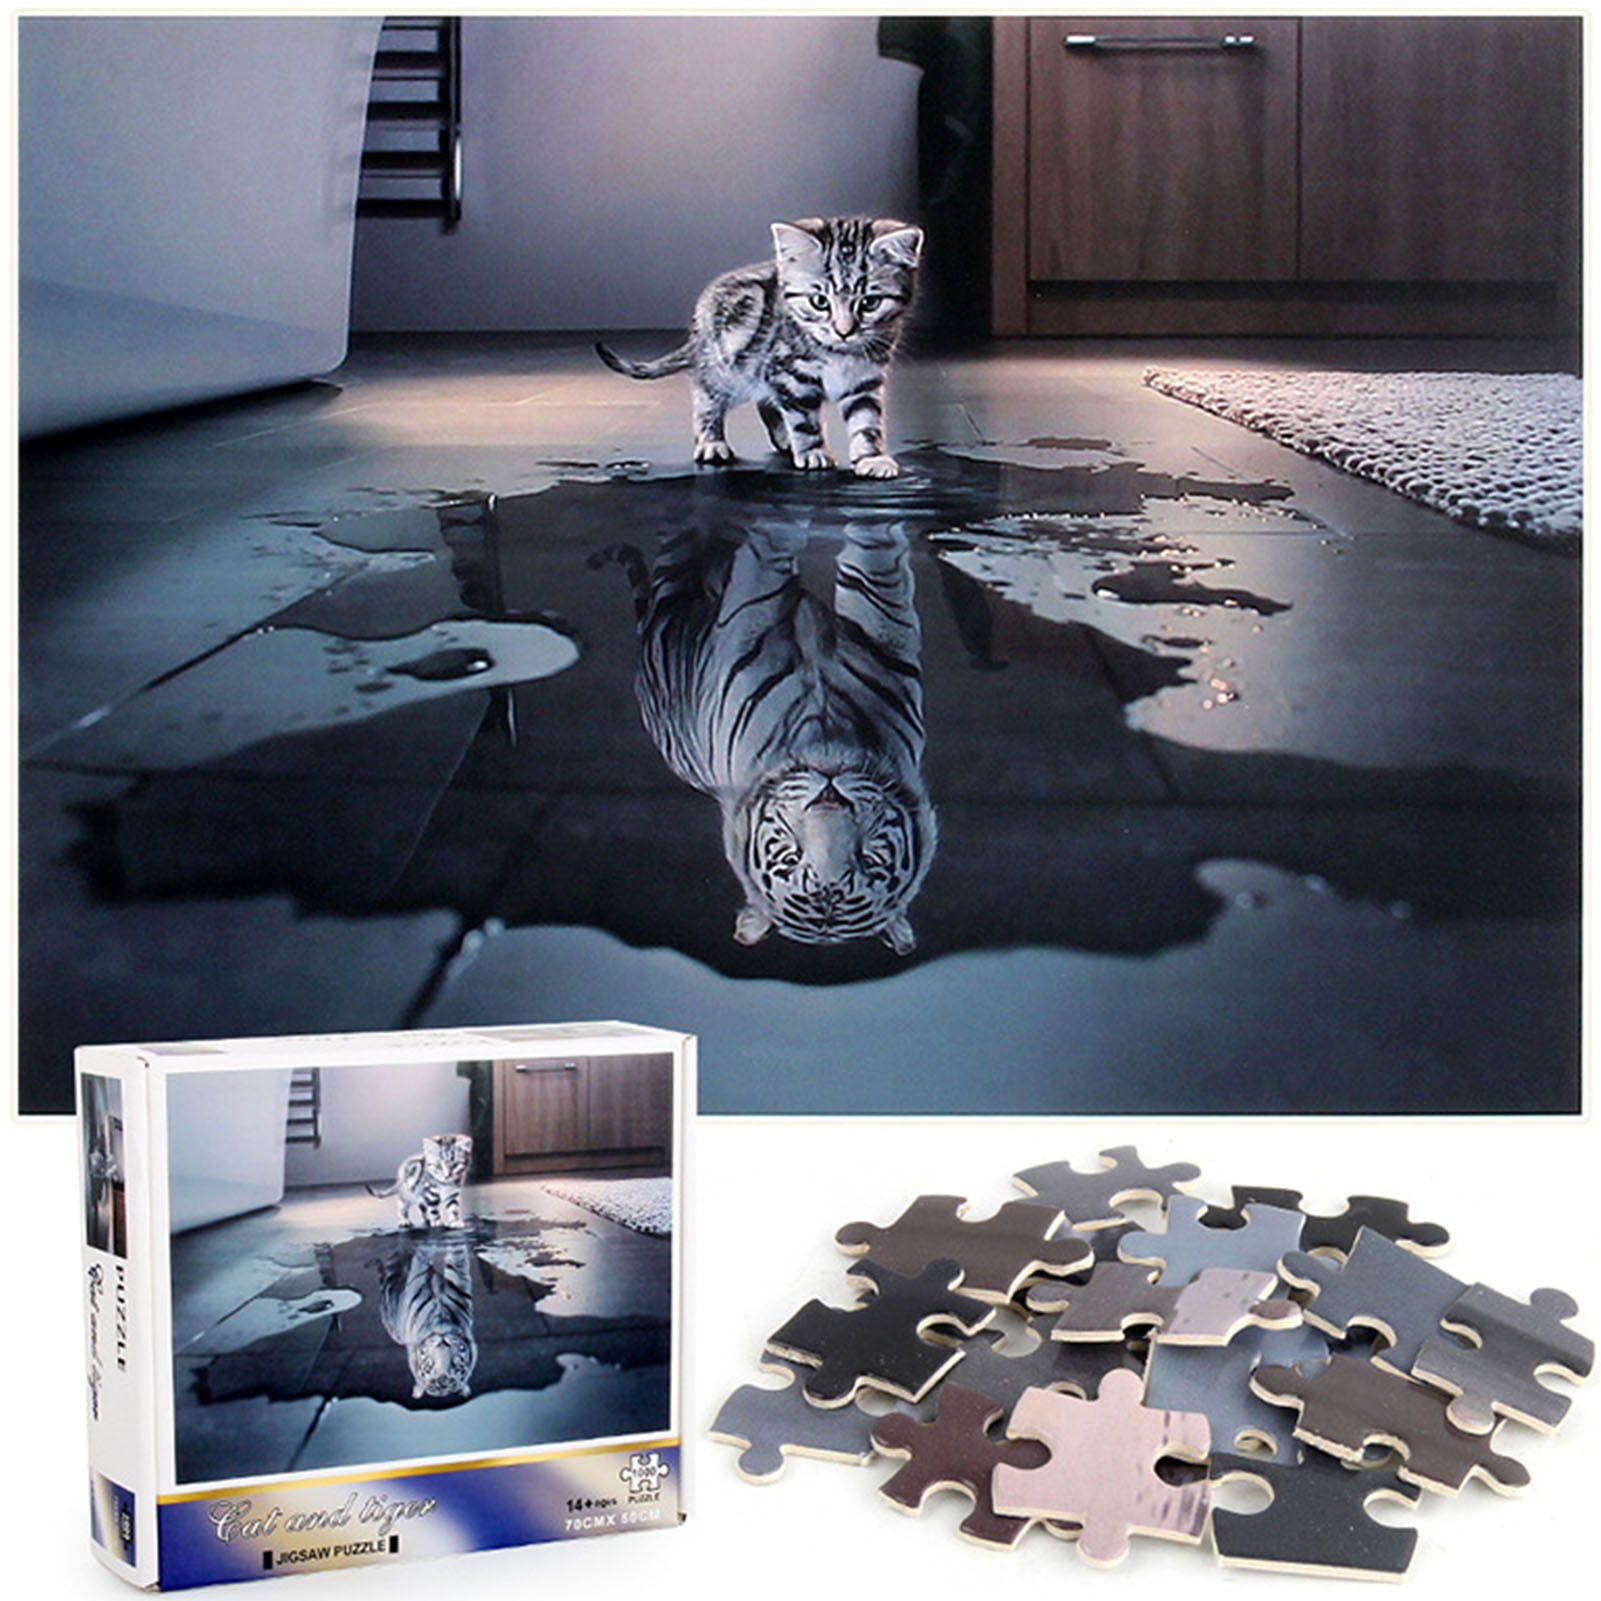 Piece Jigsaw Puzzle for Adults and Families Tiger-4000 4000 Piece Jigsaw Puzzle Home Decor Intellectual Game Wall Art Unique Gift